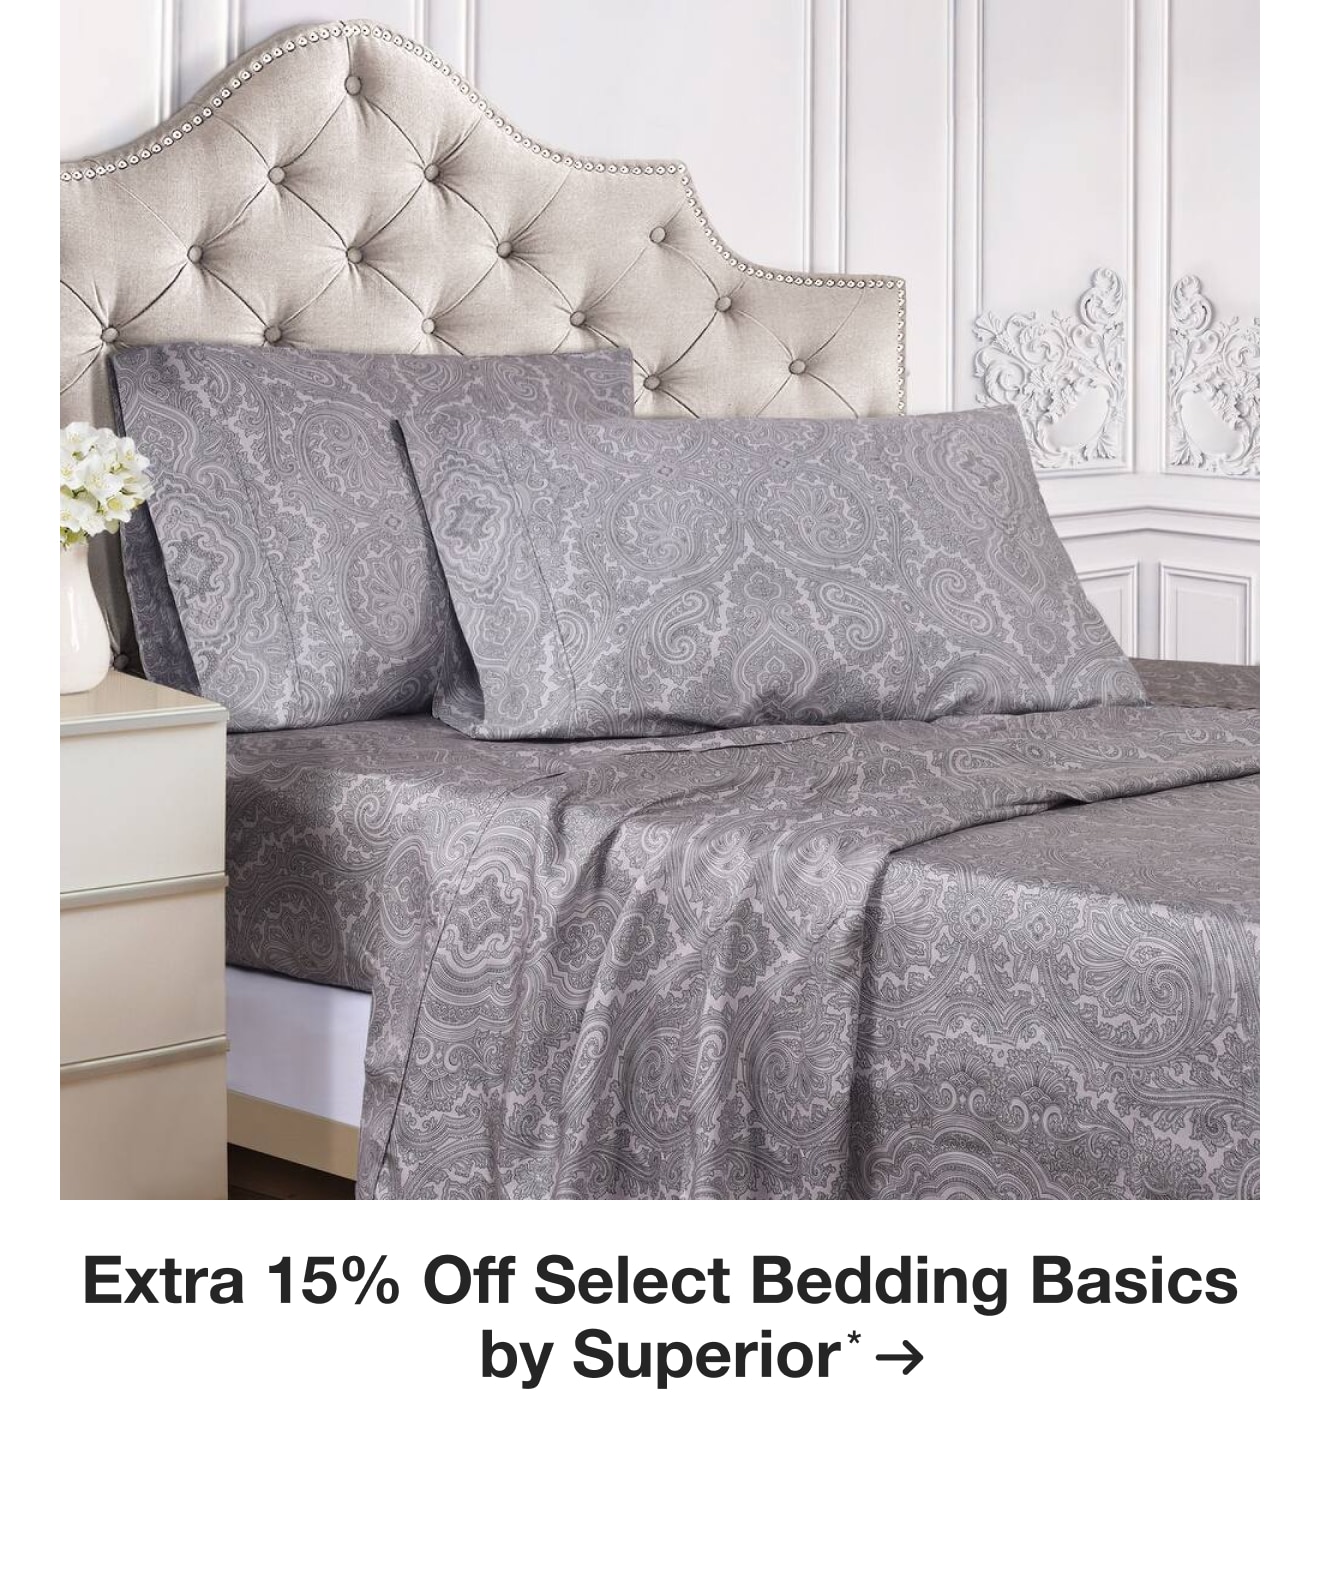 Extra 15% off Select Bedding Basics by Superior*